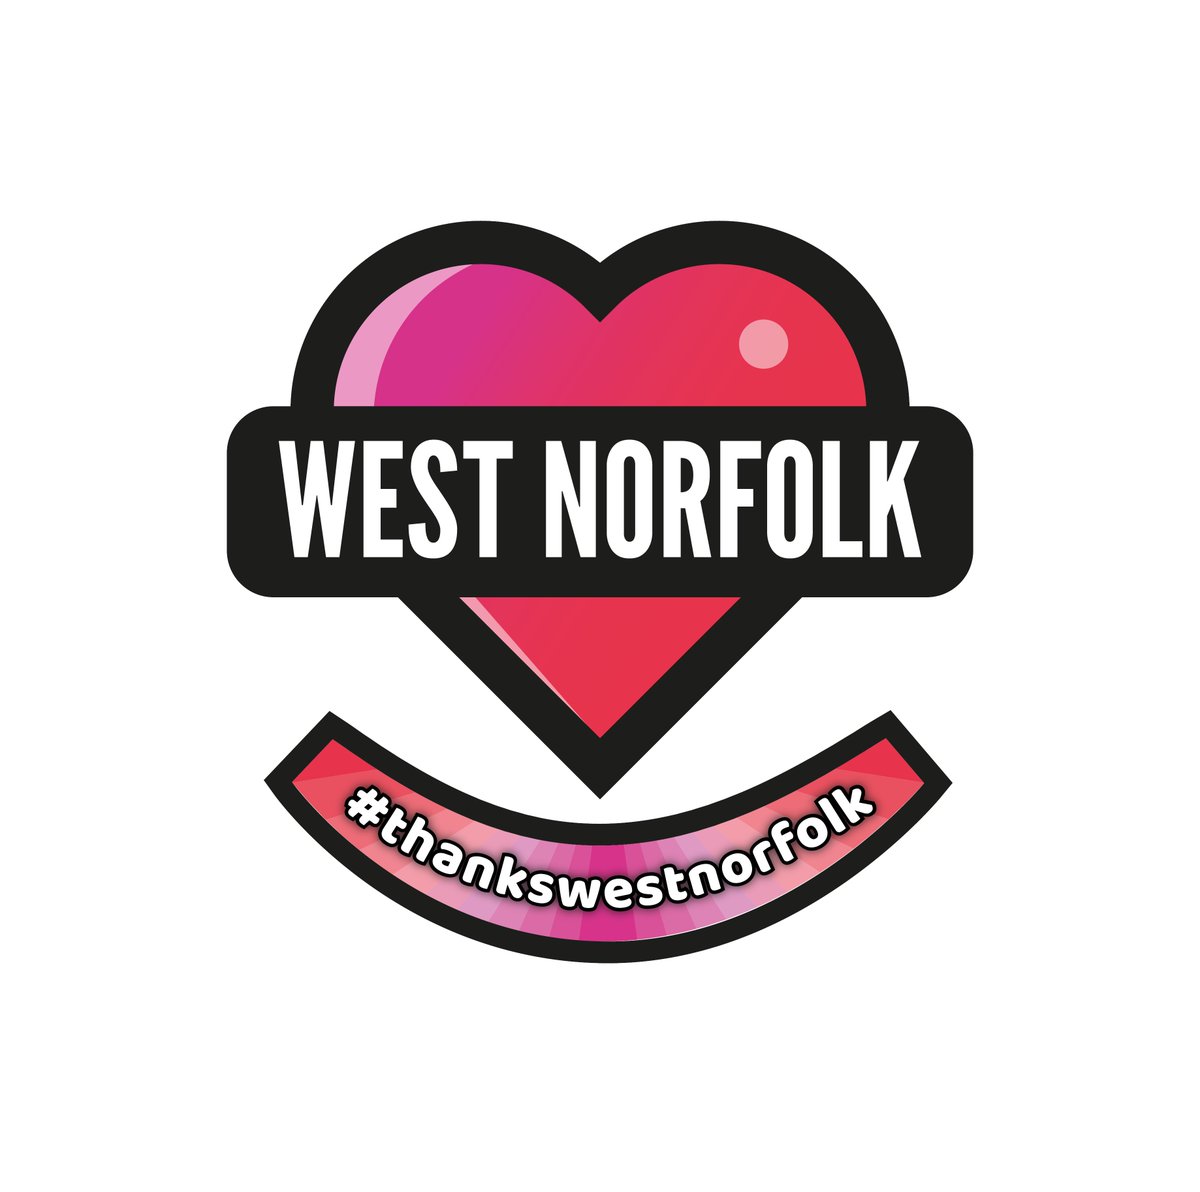 Calling west Norfolk’s budding artists. There are two things you can work on this half term. 1. Decorate & design our new benches: west-norfolk.gov.uk/news/article/9… 2. Try out the Love West Norfolk resource pack: lovewestnorfolk.co.uk/love-west-norf…